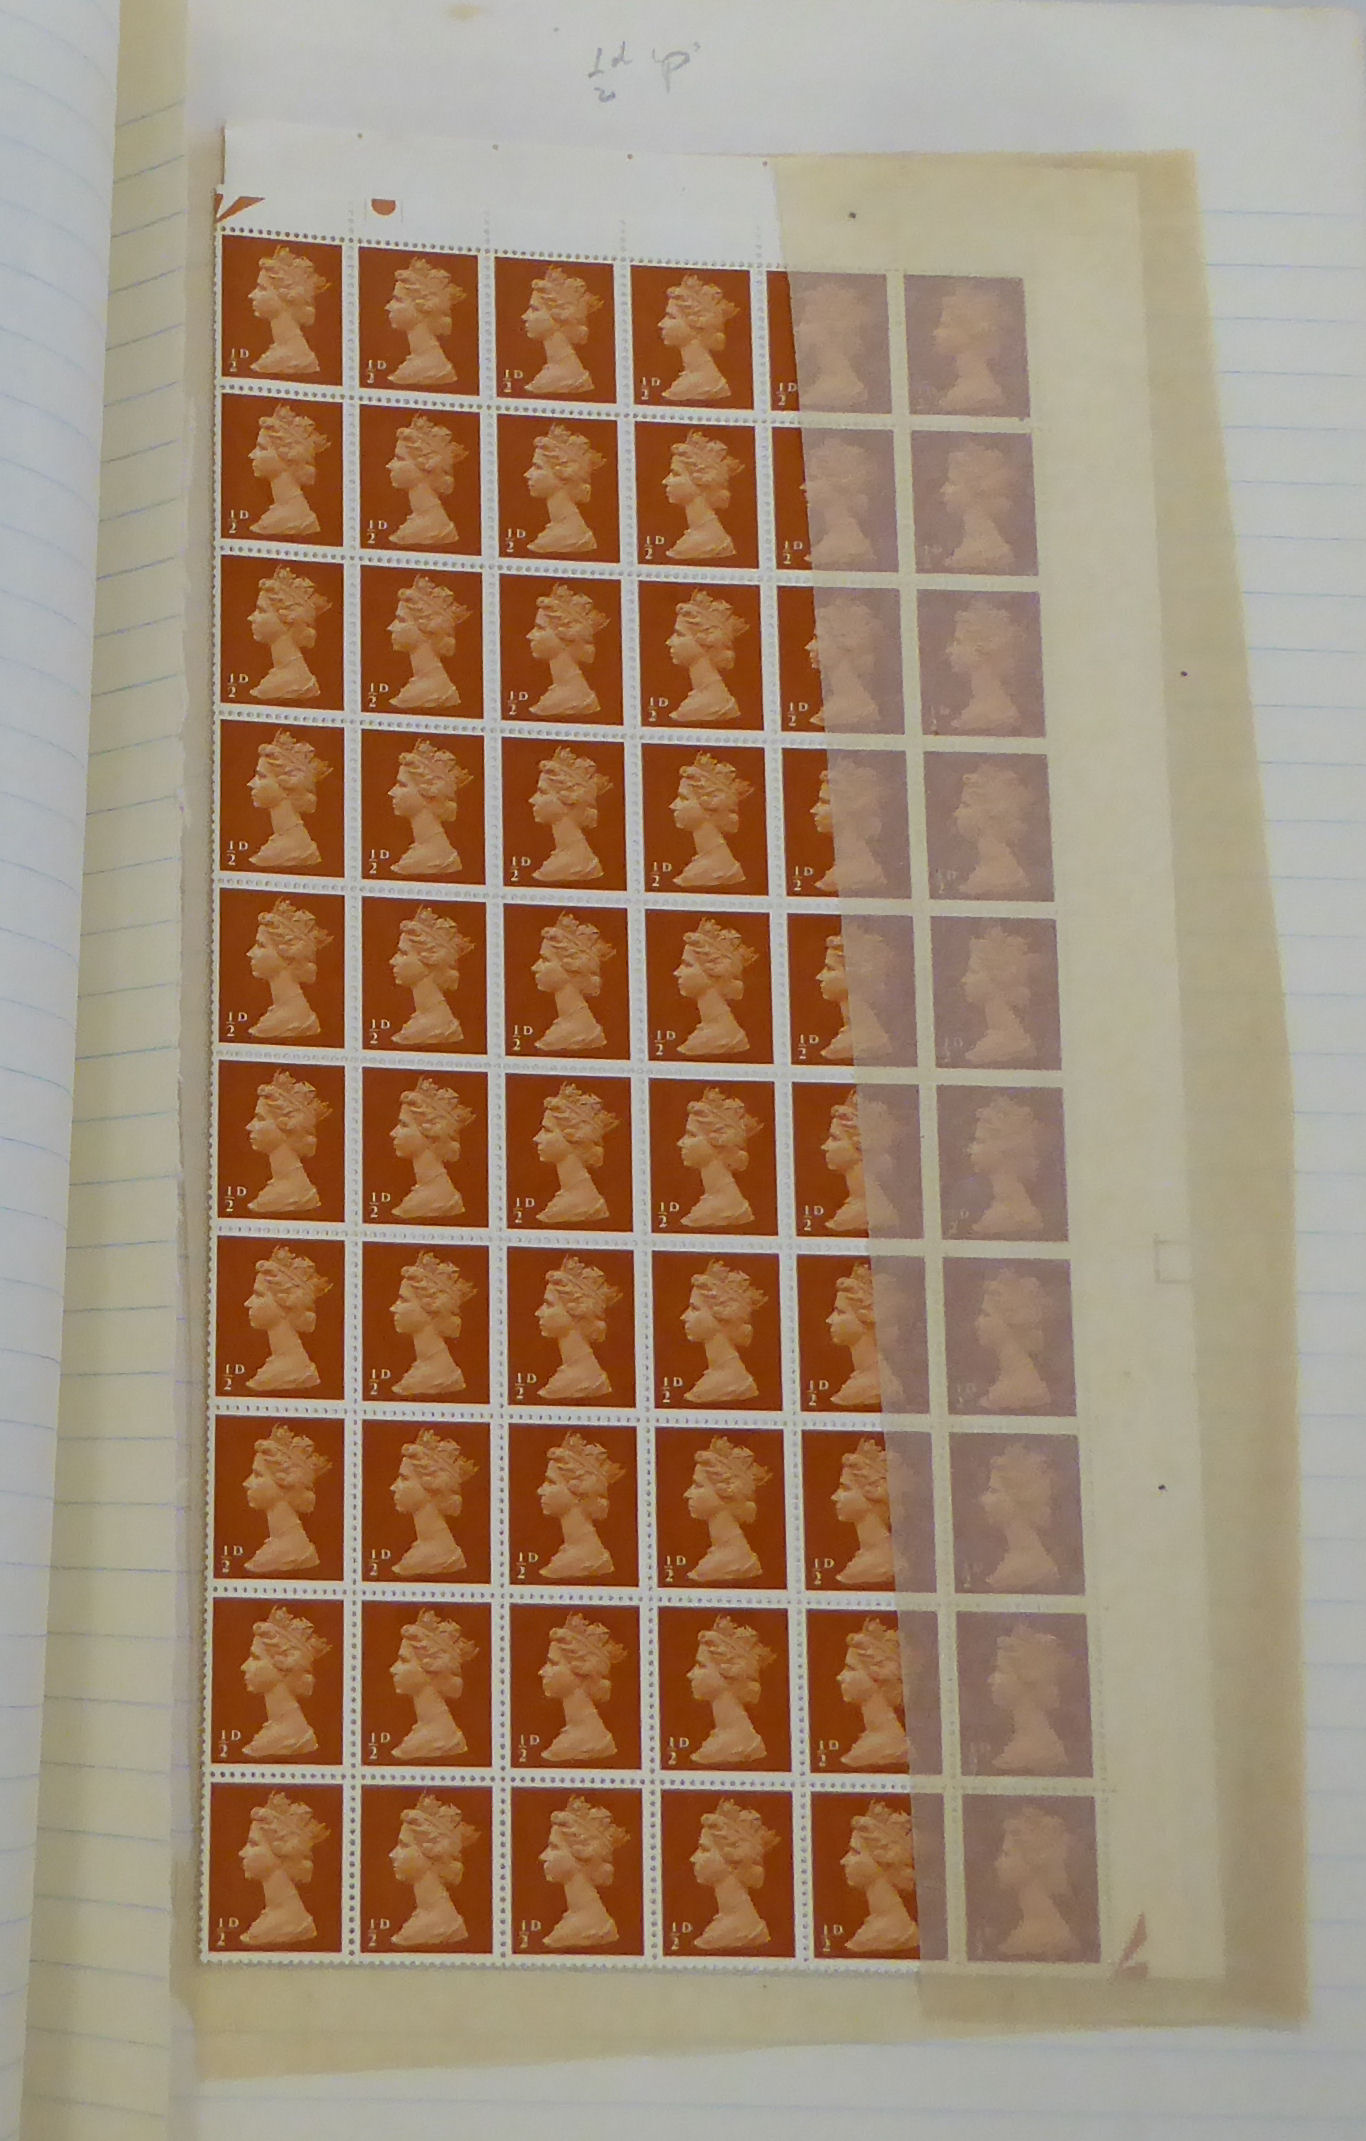 Uncollated postage stamps, British sheets and blocks - Image 10 of 10